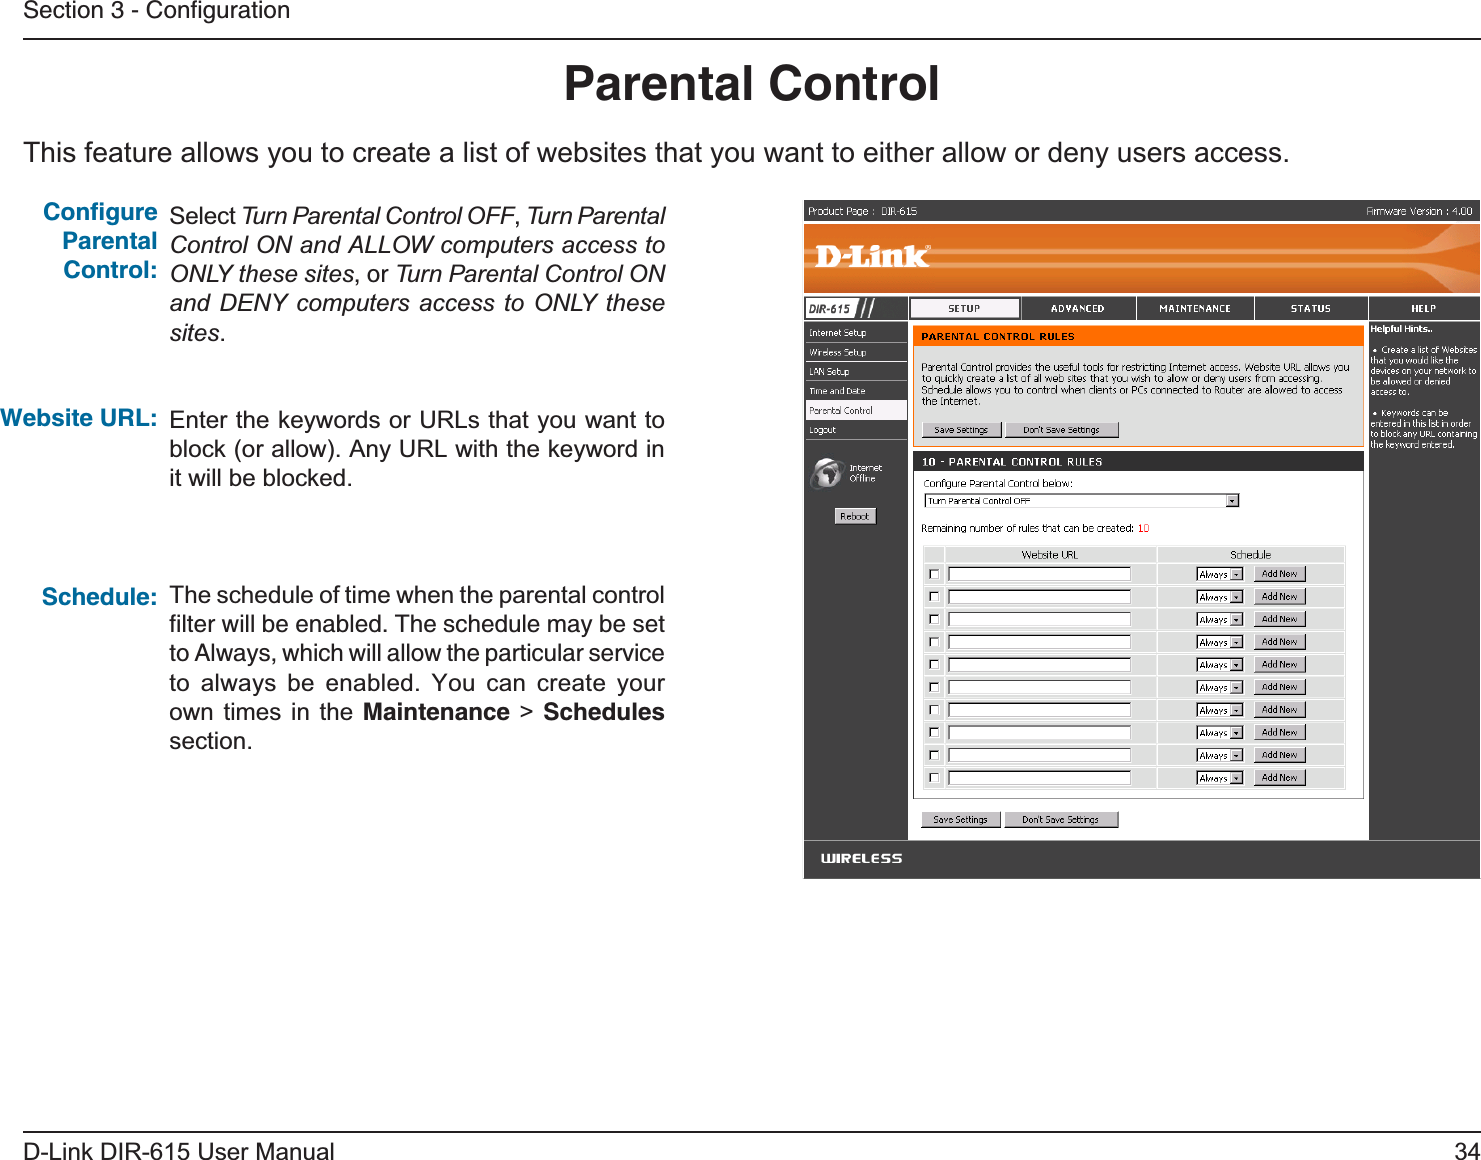 34D-Link DIR-615 User ManualSection 3 - ConﬁgurationThis feature allows you to create a list of websites that you want to either allow or deny users access.Parental ControlSelect Turn Parental Control OFF, Turn Parental Control ON and ALLOW computers access to ONLY these sites, or Turn Parental Control ON and DENY computers access to ONLY these sites.Enter the keywords or URLs that you want to block (or allow). Any URL with the keyword in it will be blocked.The schedule of time when the parental control ﬁlter will be enabled. The schedule may be set to Always, which will allow the particular service to always be enabled. You can create your own times in the Maintenance &gt; Schedulessection.Conﬁgure Parental Control:Website URL:Schedule: